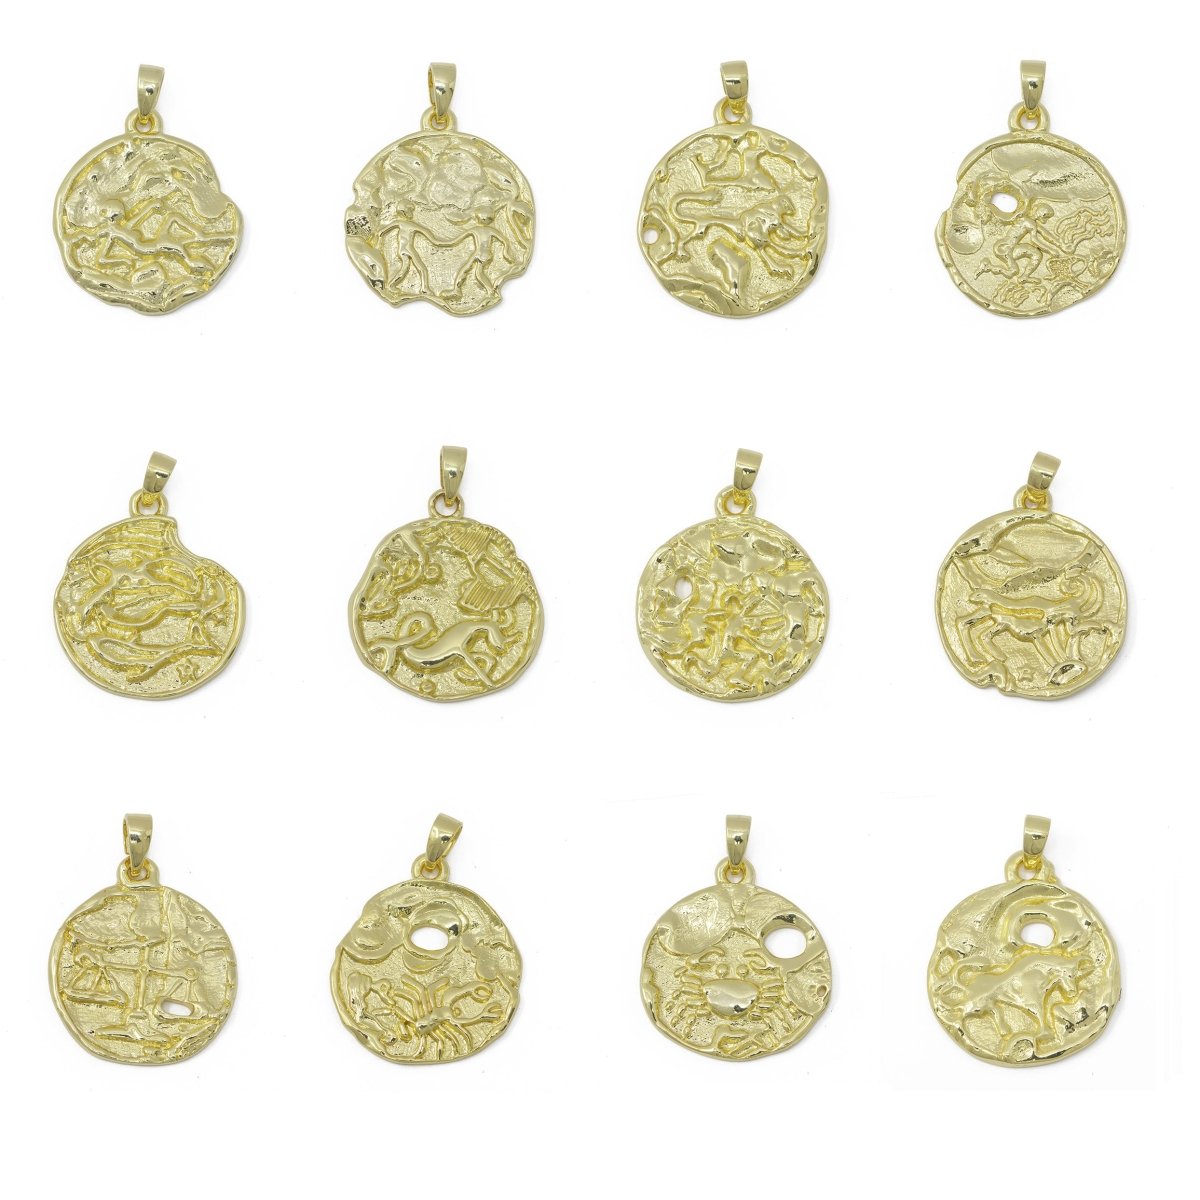 Dainty 14K Gold Filled Zodiac Horoscope Sign Constellation Medallion Pendant Charm Rustic Rough Hammered Coin for Necklace Jewelry Making | A-560-A-571 - DLUXCA